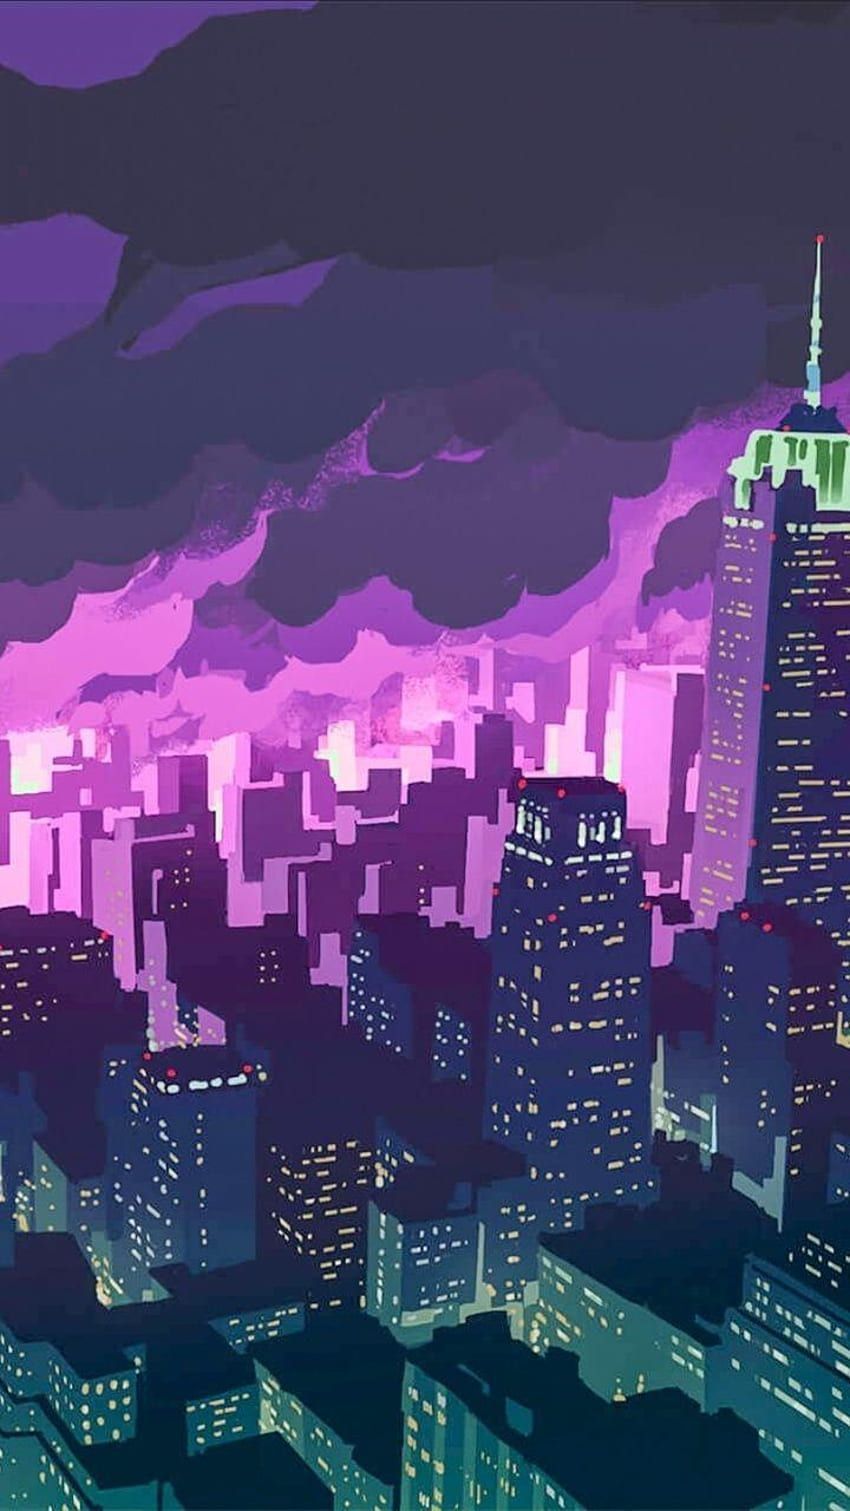 A city skyline with purple clouds in the background - Anime city, cityscape, city